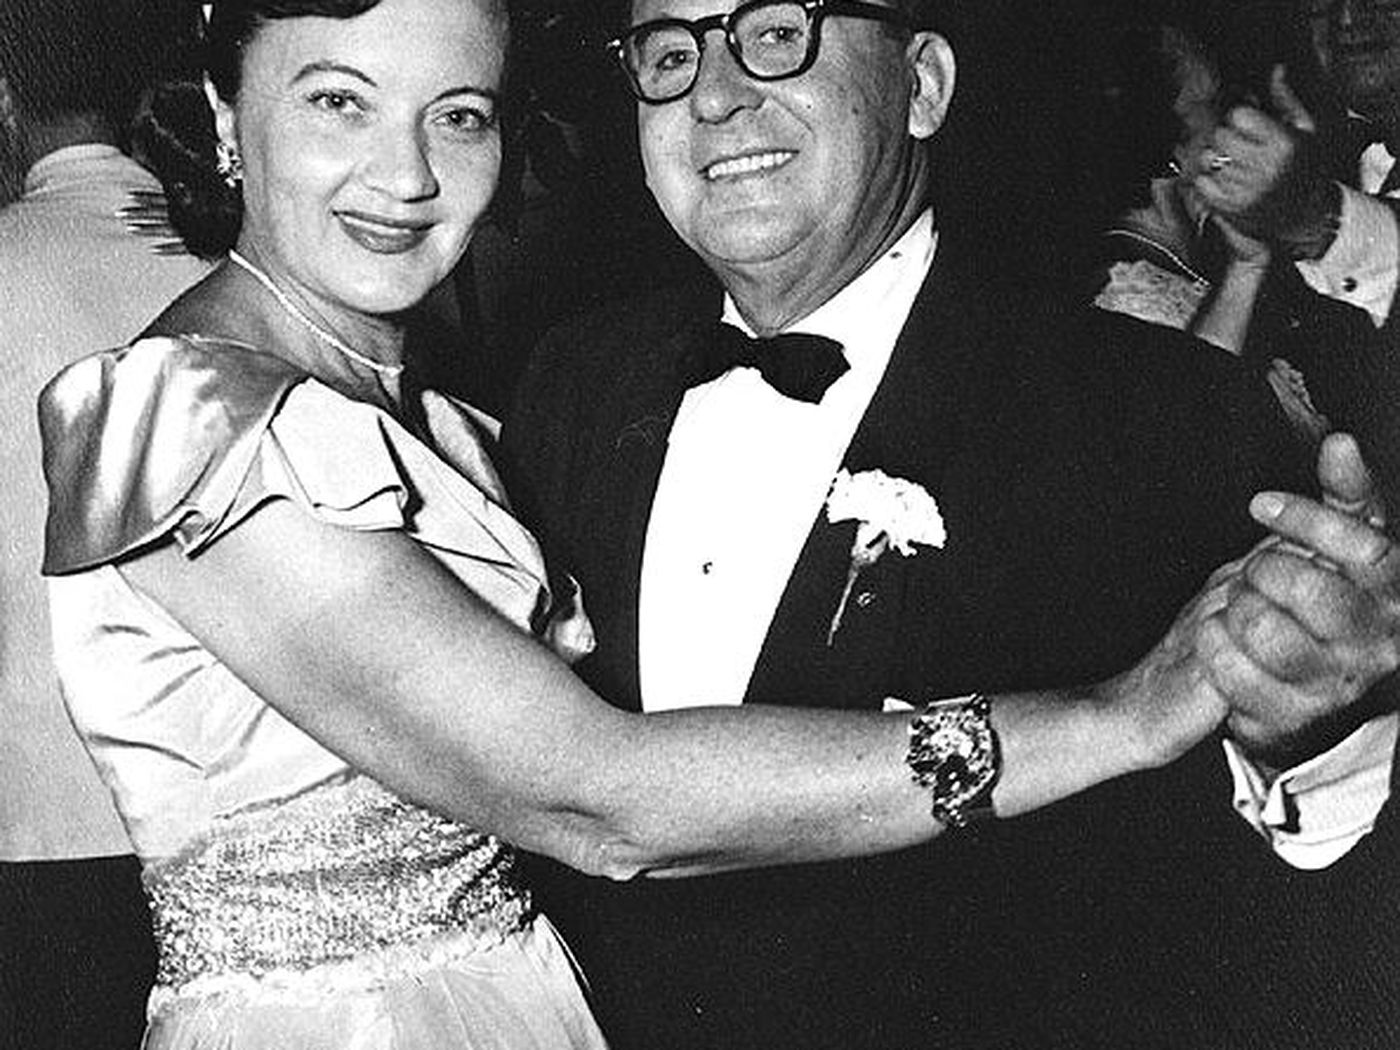 The Essex House's architect, Henry Hohauser, sharing a dance with his wife.